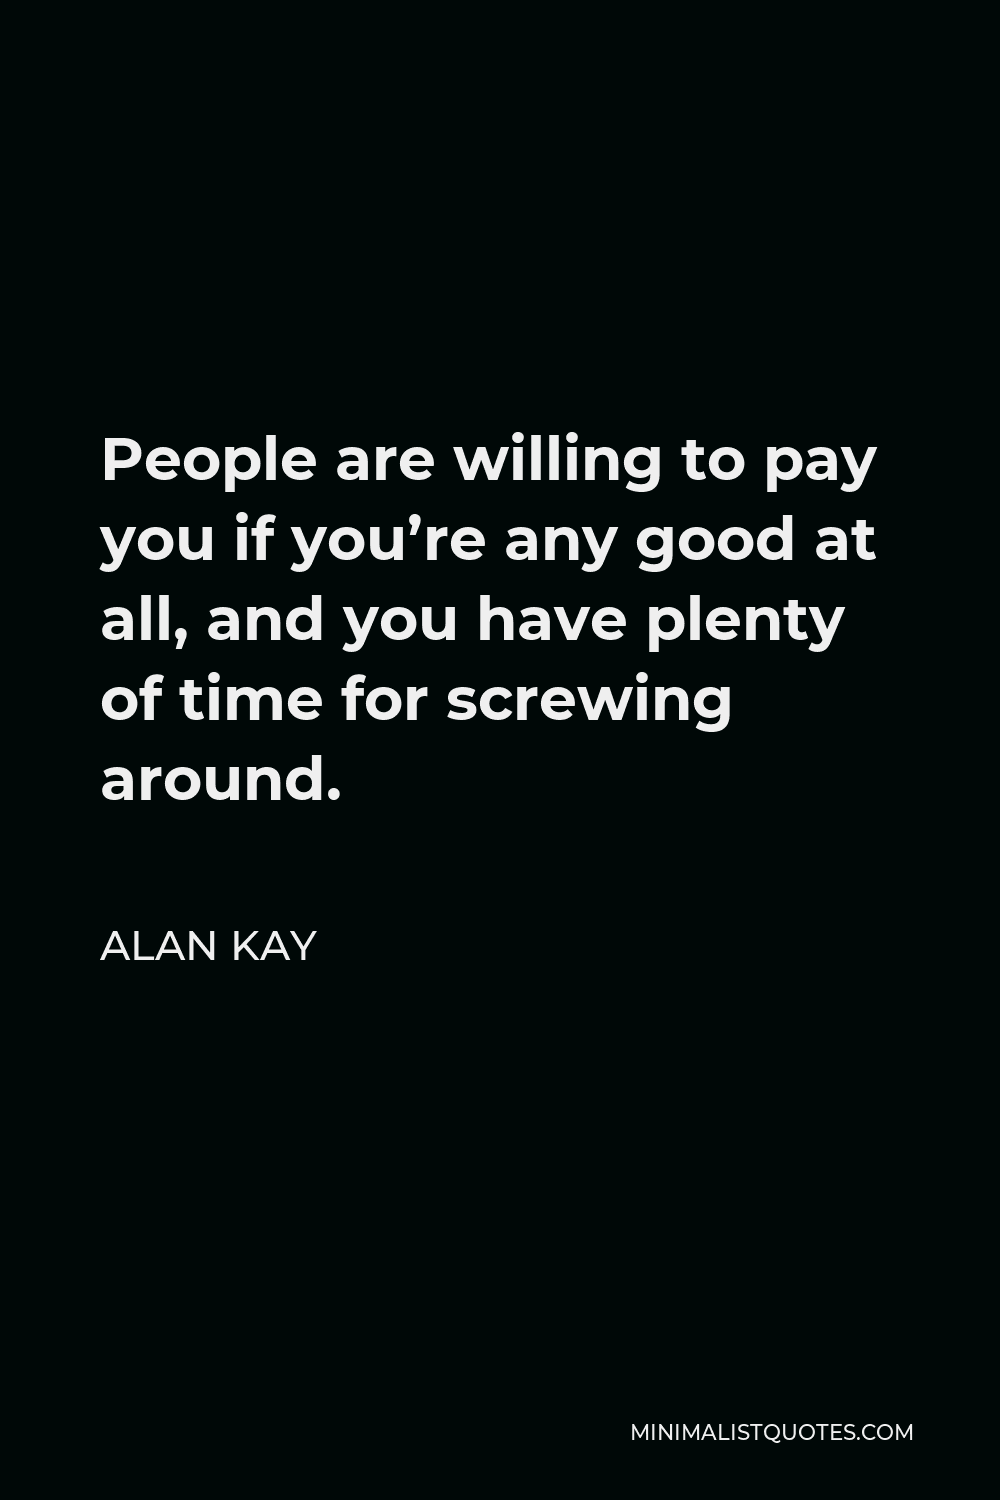 Alan Kay Quote - People are willing to pay you if you’re any good at all, and you have plenty of time for screwing around.